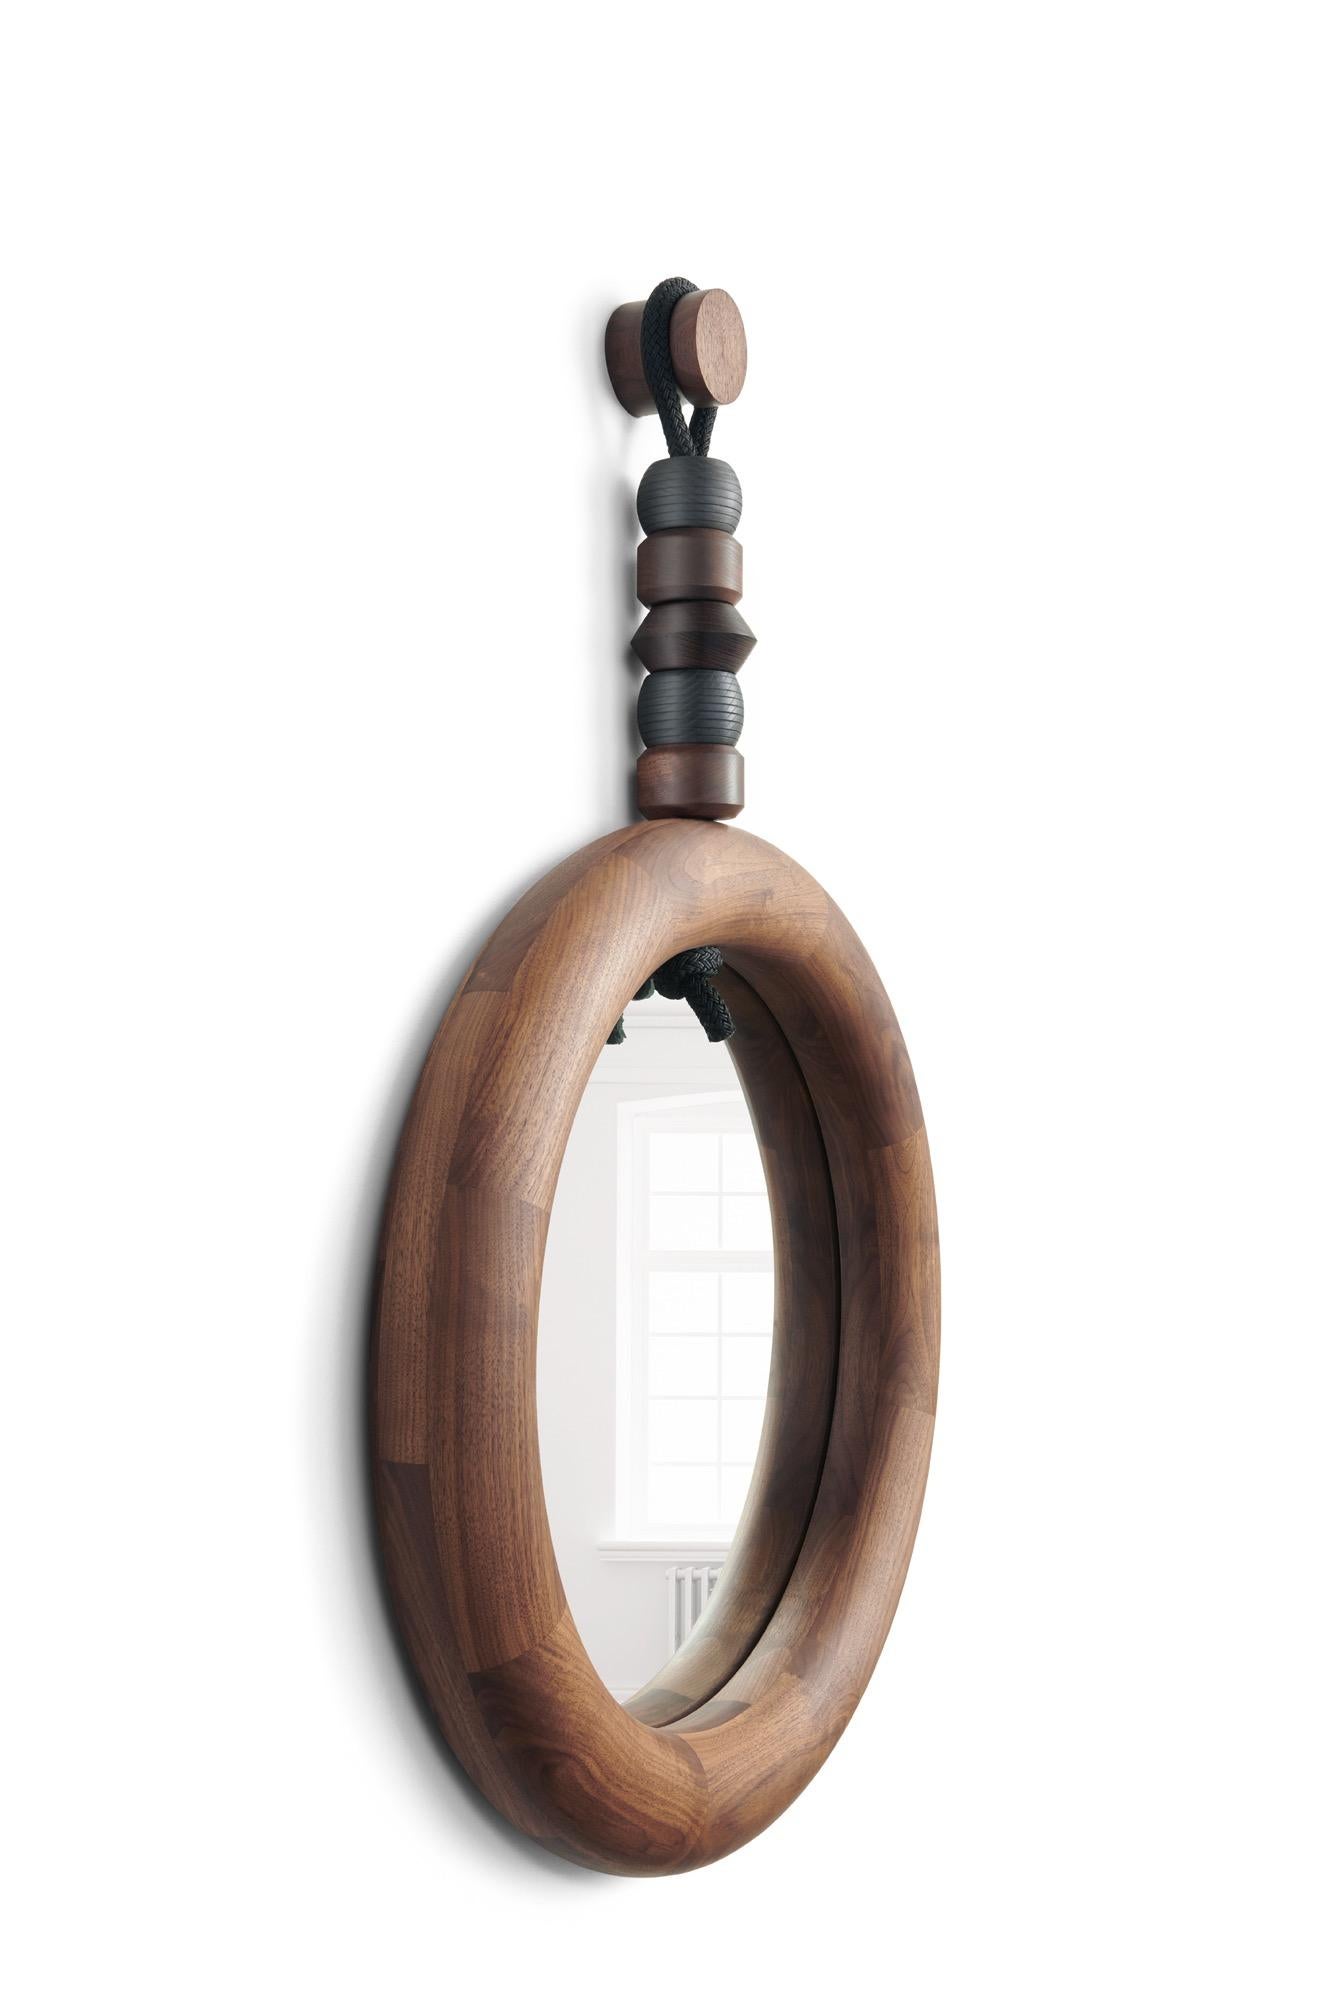 Bead and ring mirror, consisting of a 26